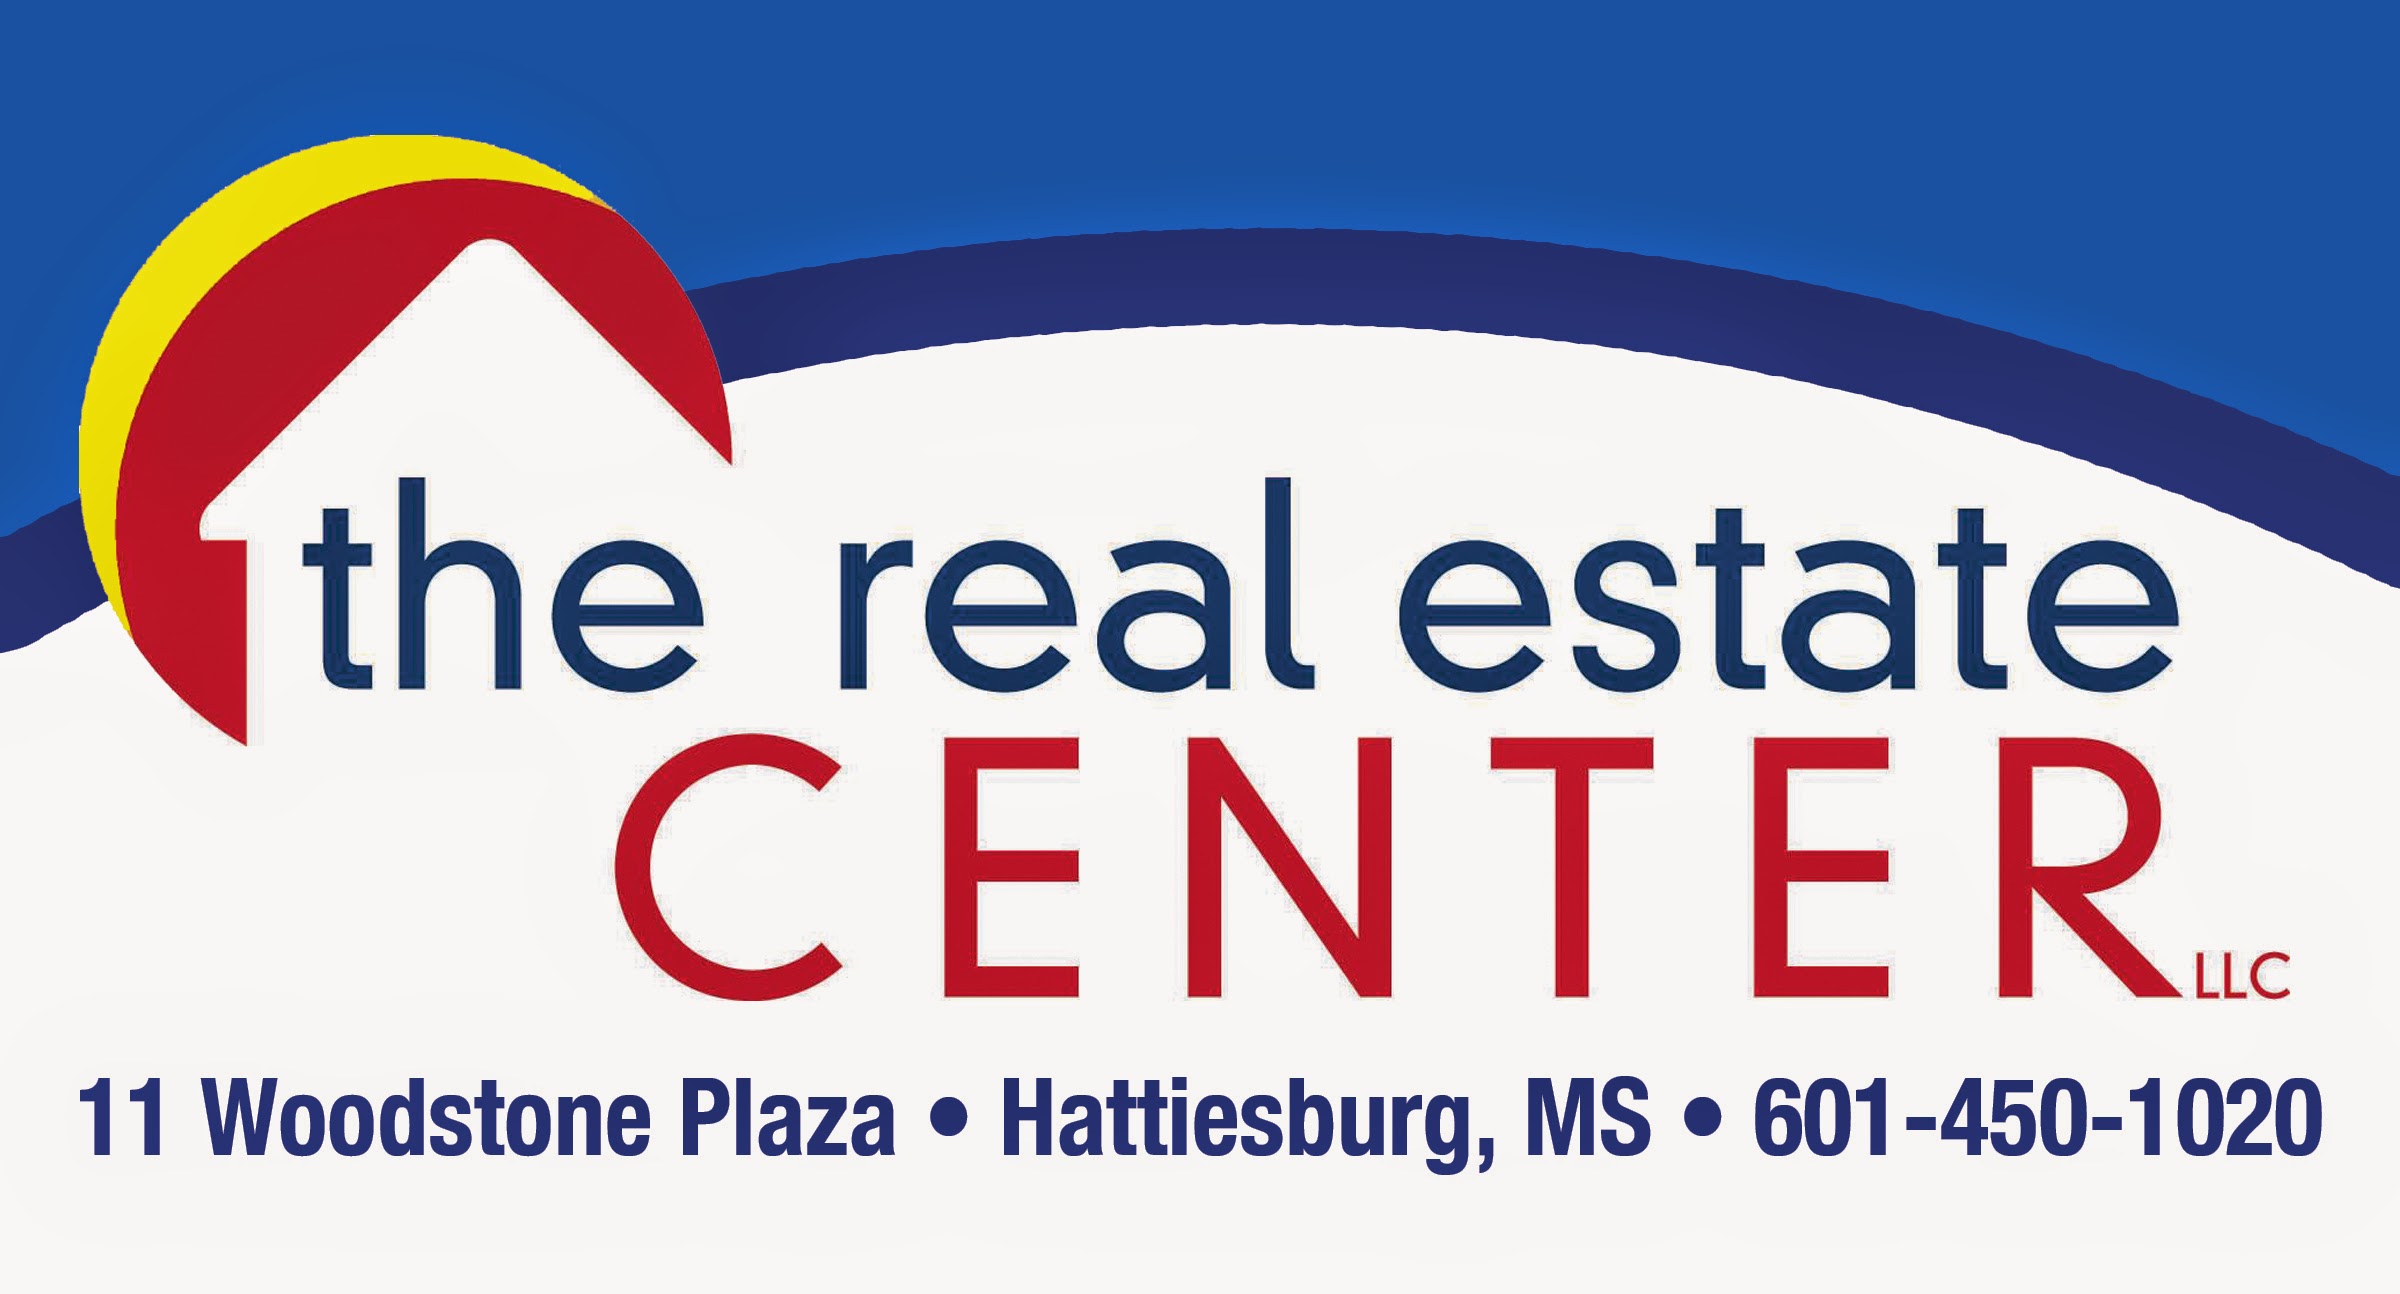 The Real Estate Center